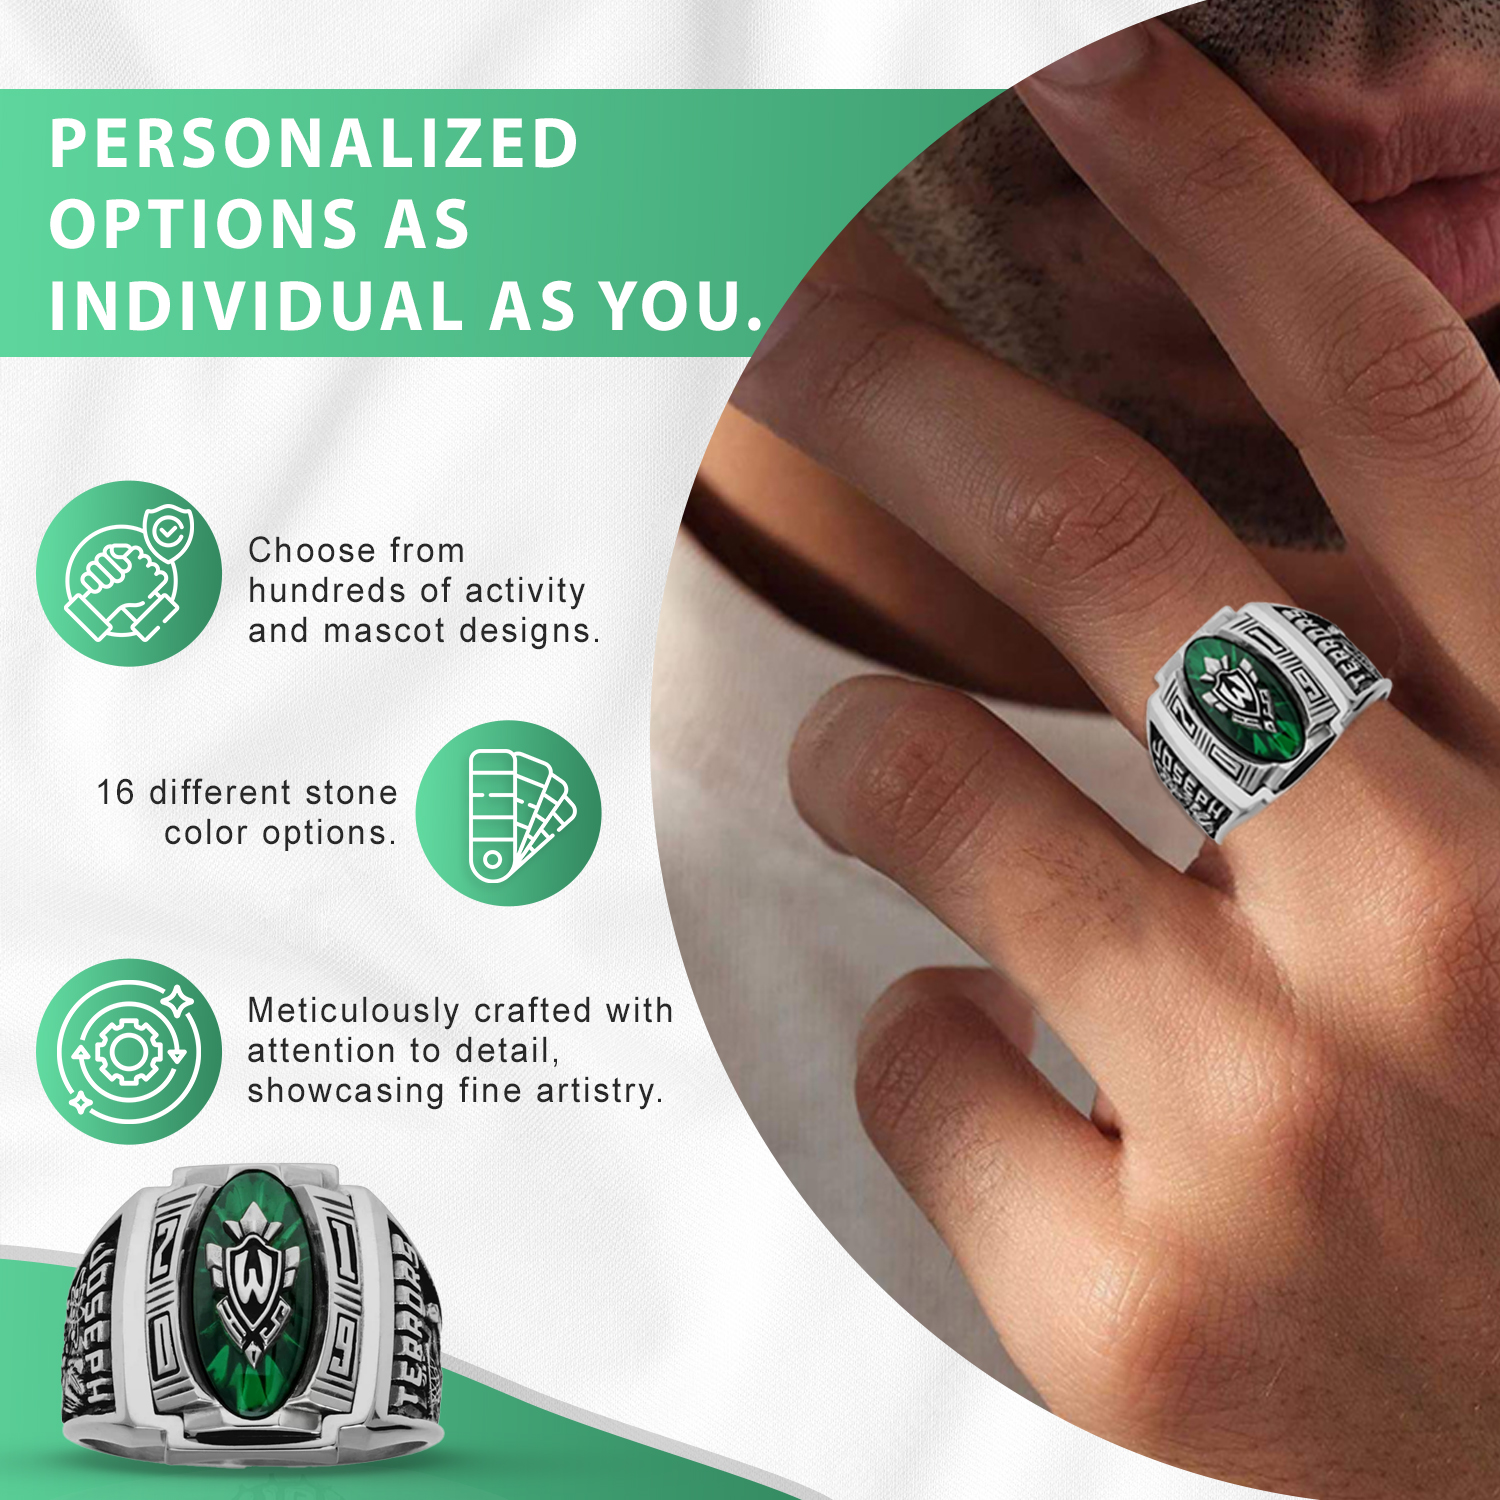 Personalized Men's Varsity Class Ring available in Valadium Metals, Valadium Two-Toned, Silver Plus, 10kt Gold Two-Toned, 10kt Gold - image 4 of 8